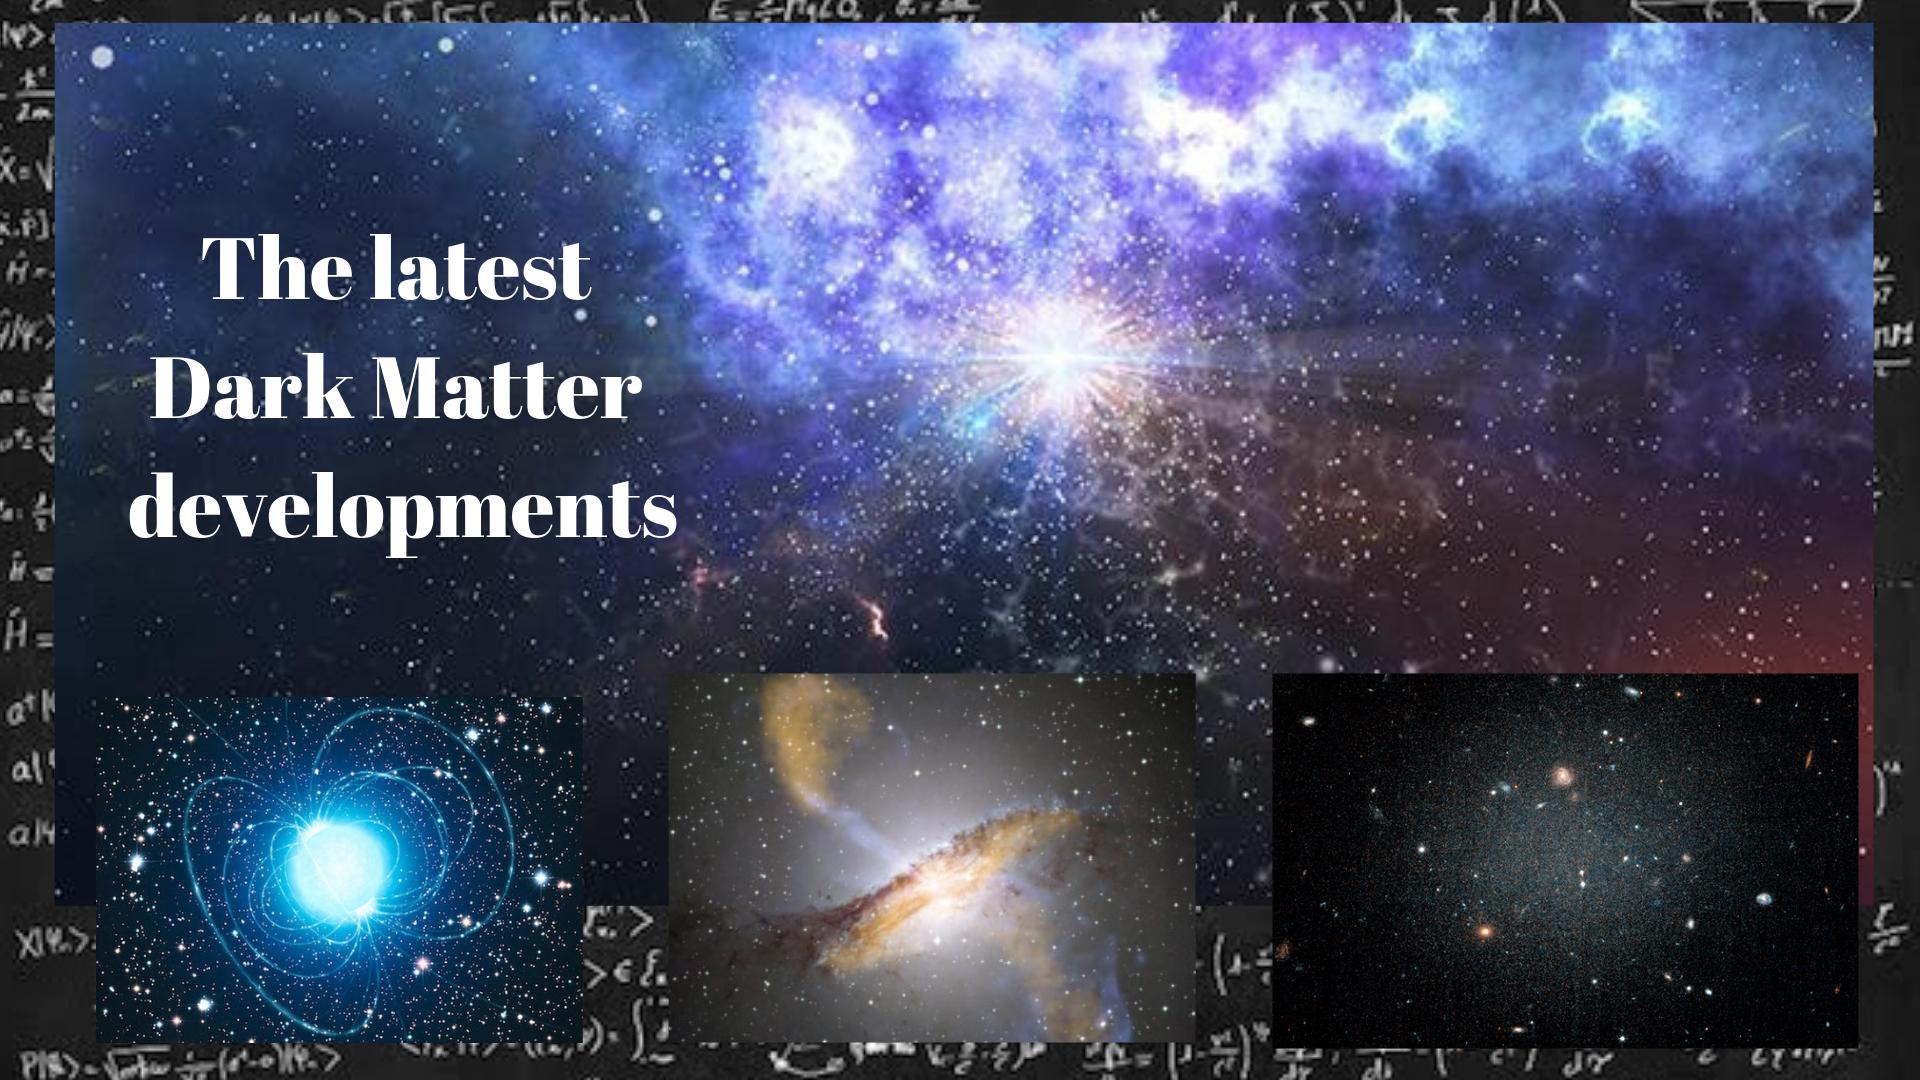 Space matters. Dark matter Space. Space is matter the most.